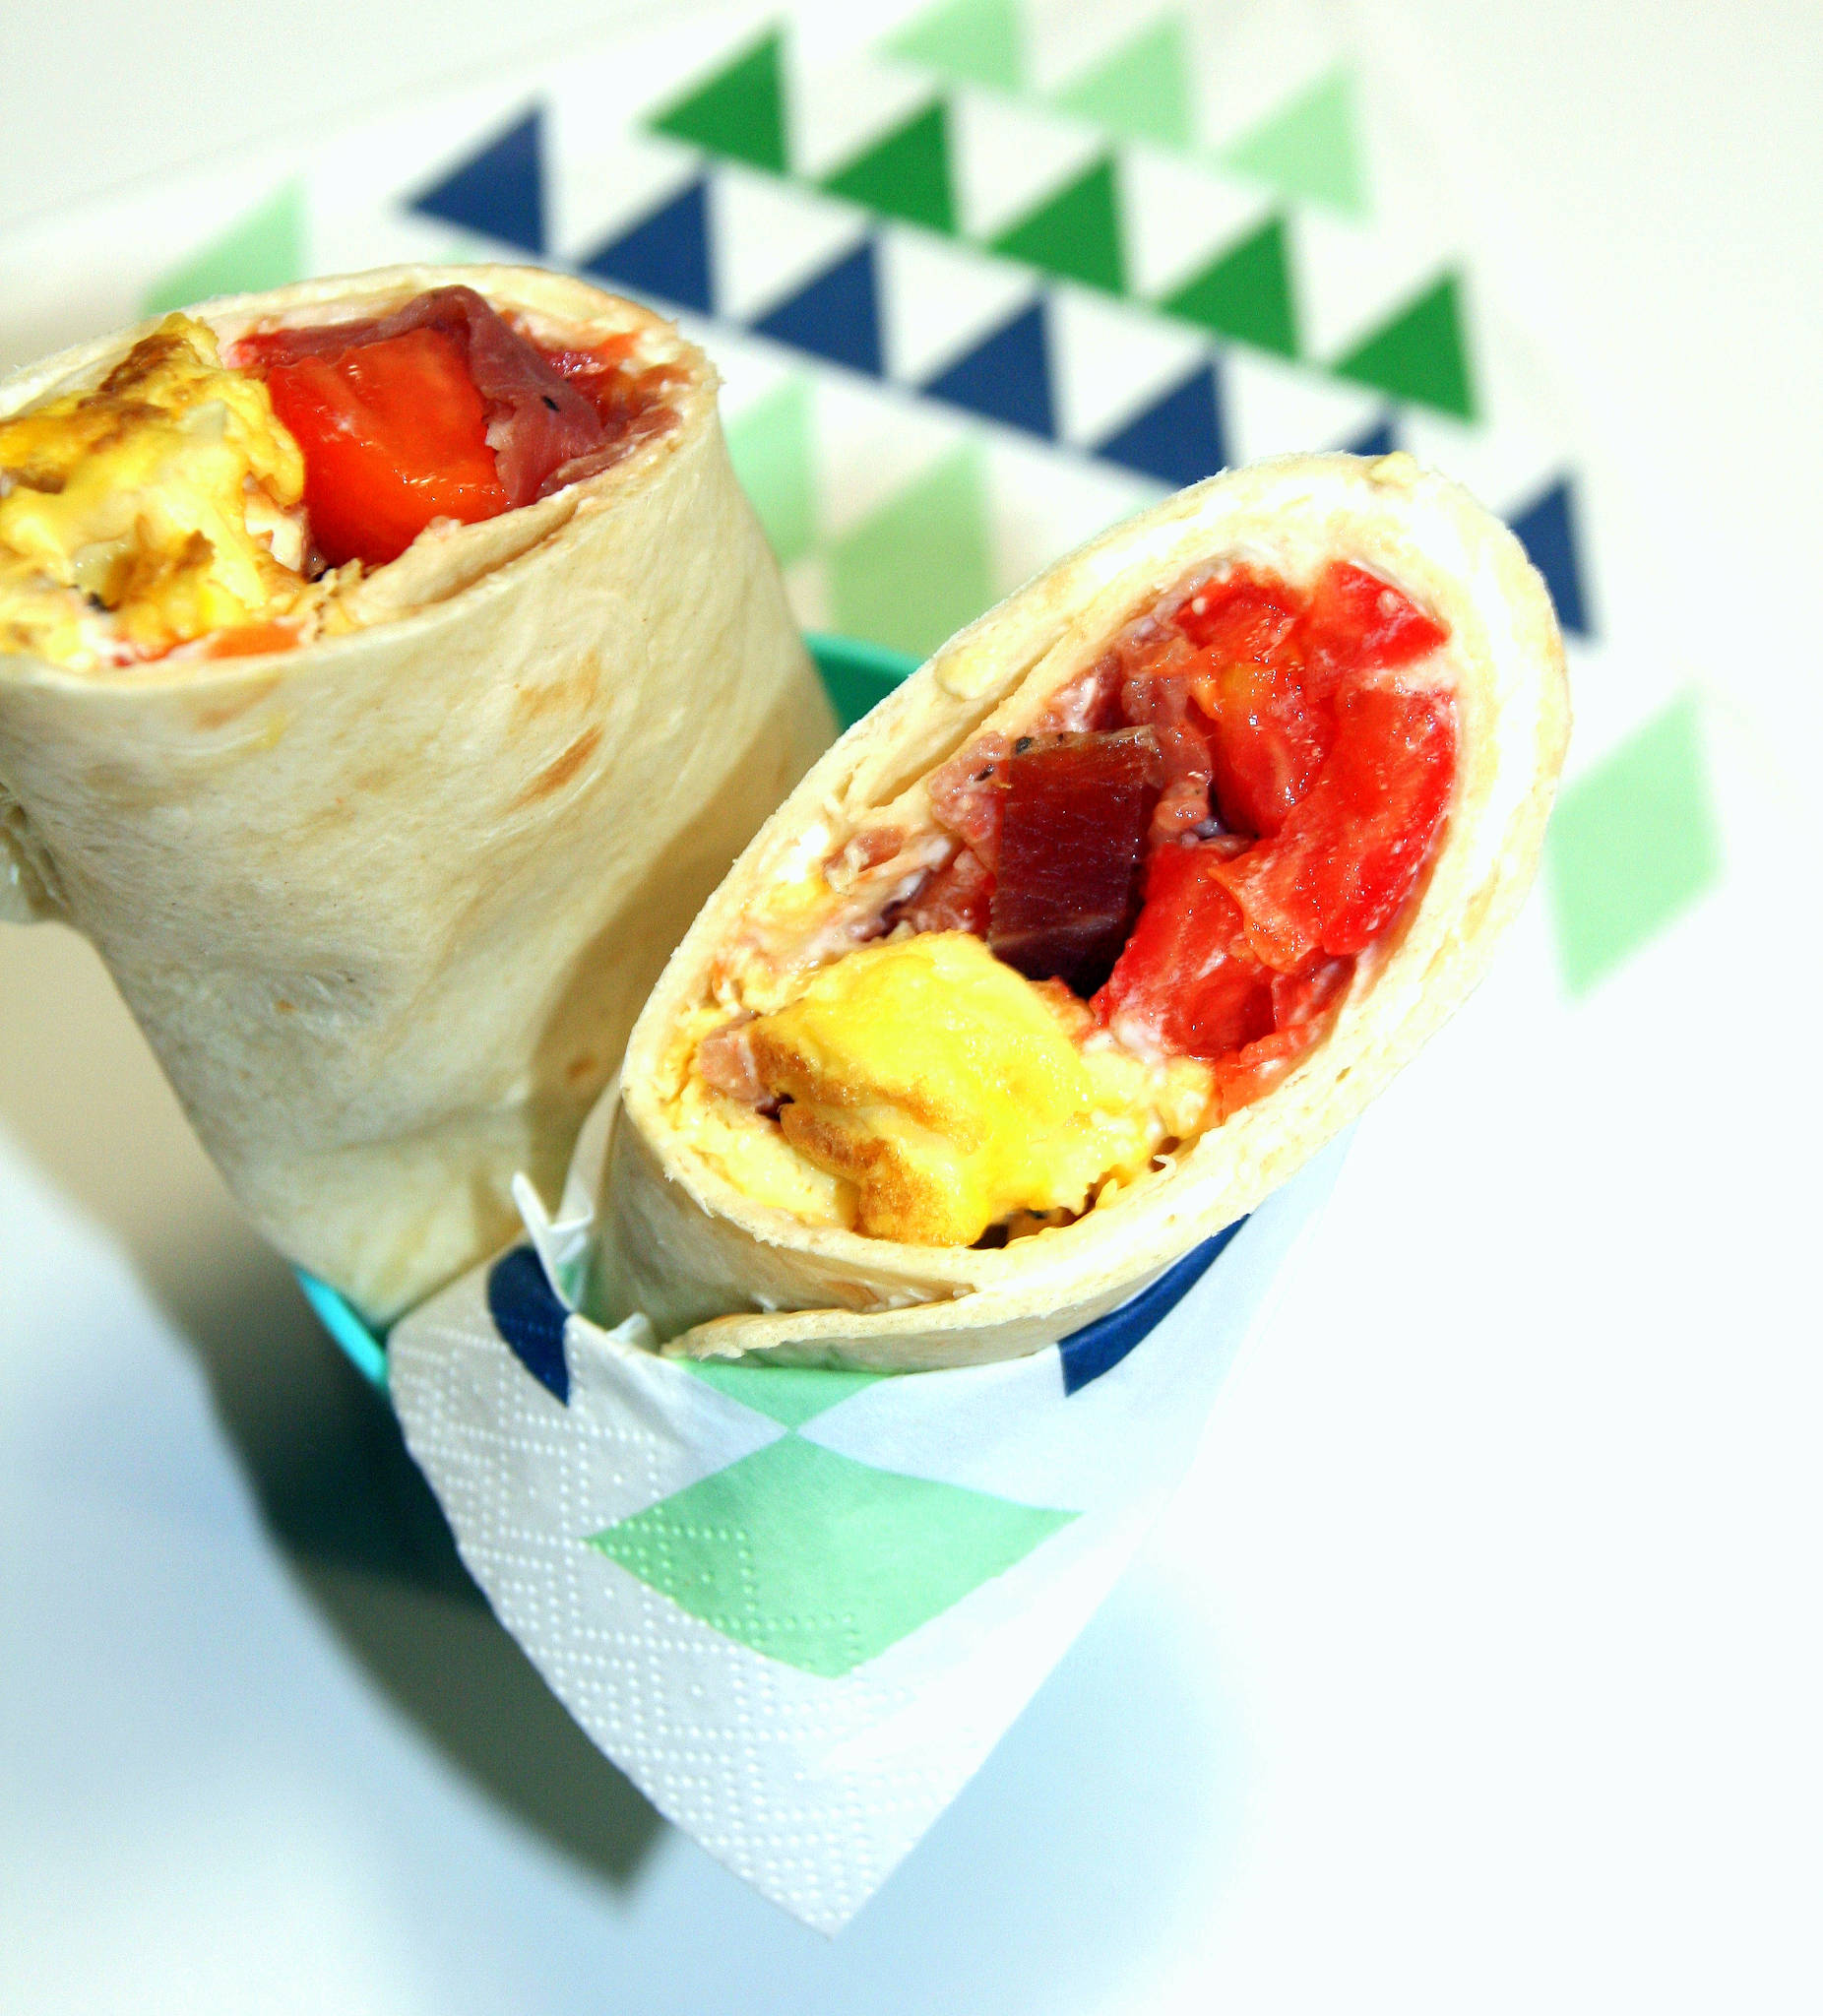 Wrap omelette, bacon, tomate, sauce fromage frais